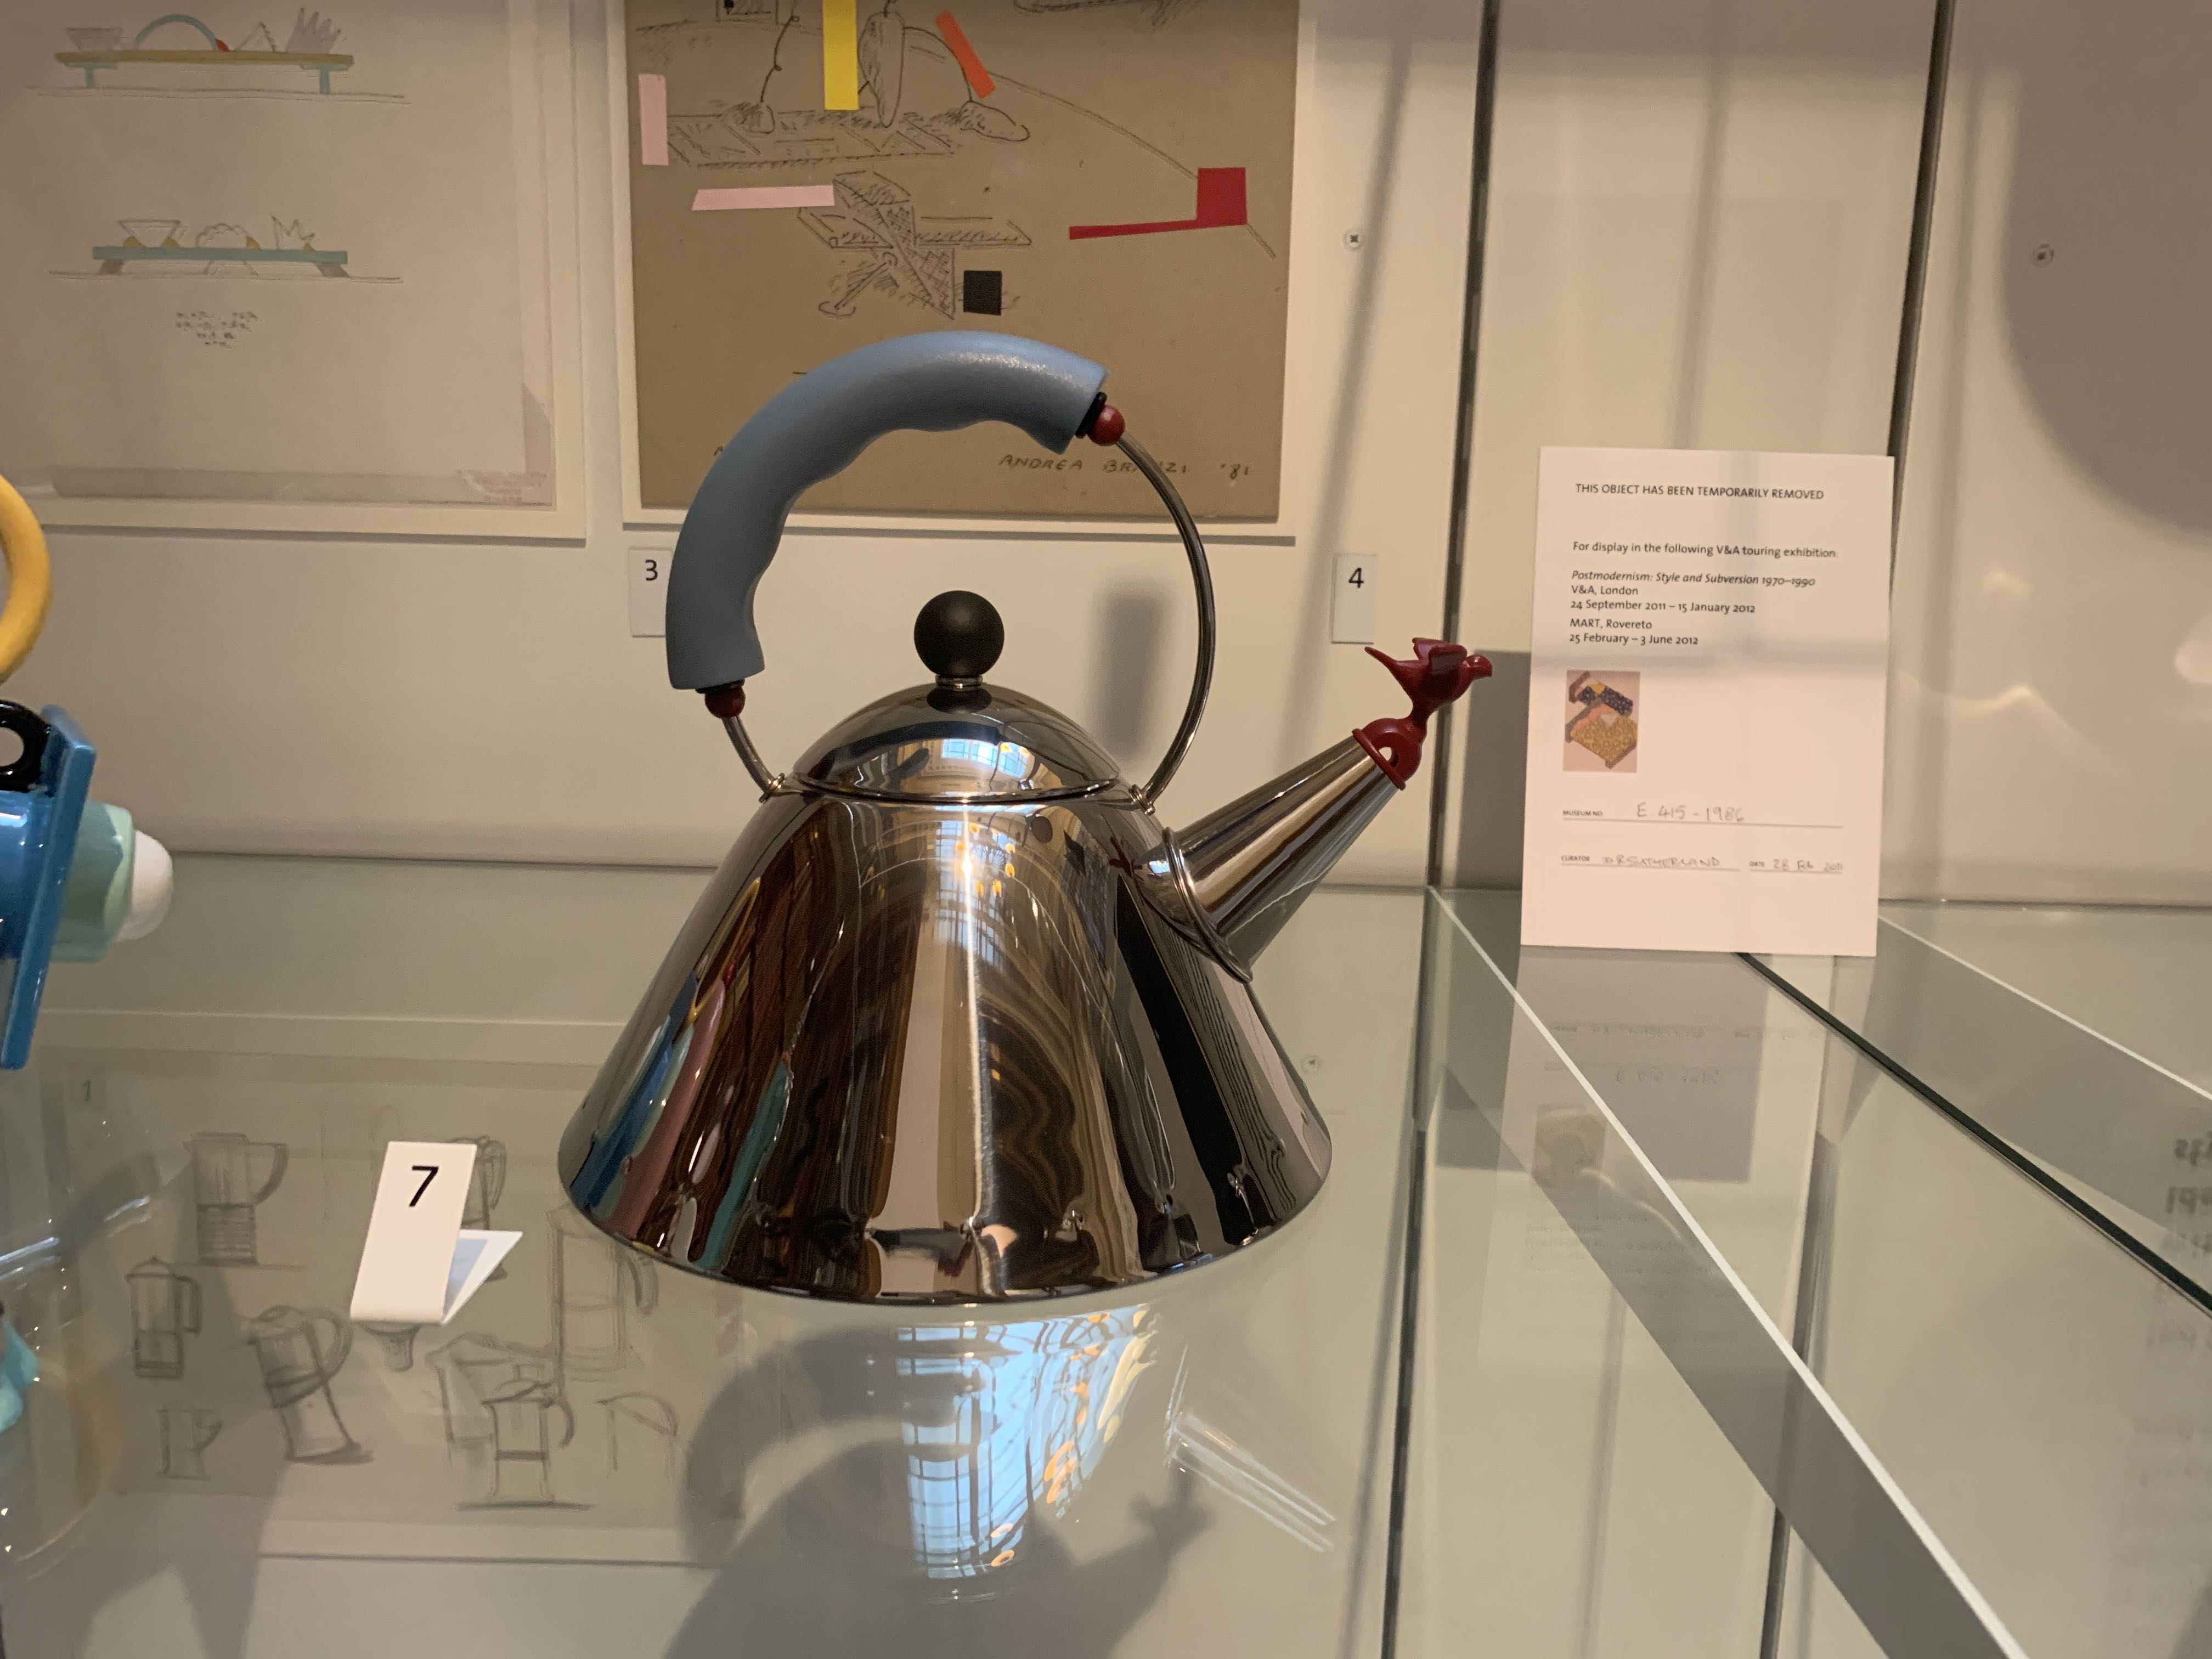 Image of a modern designed stainless steel teakettle by Michael Graves